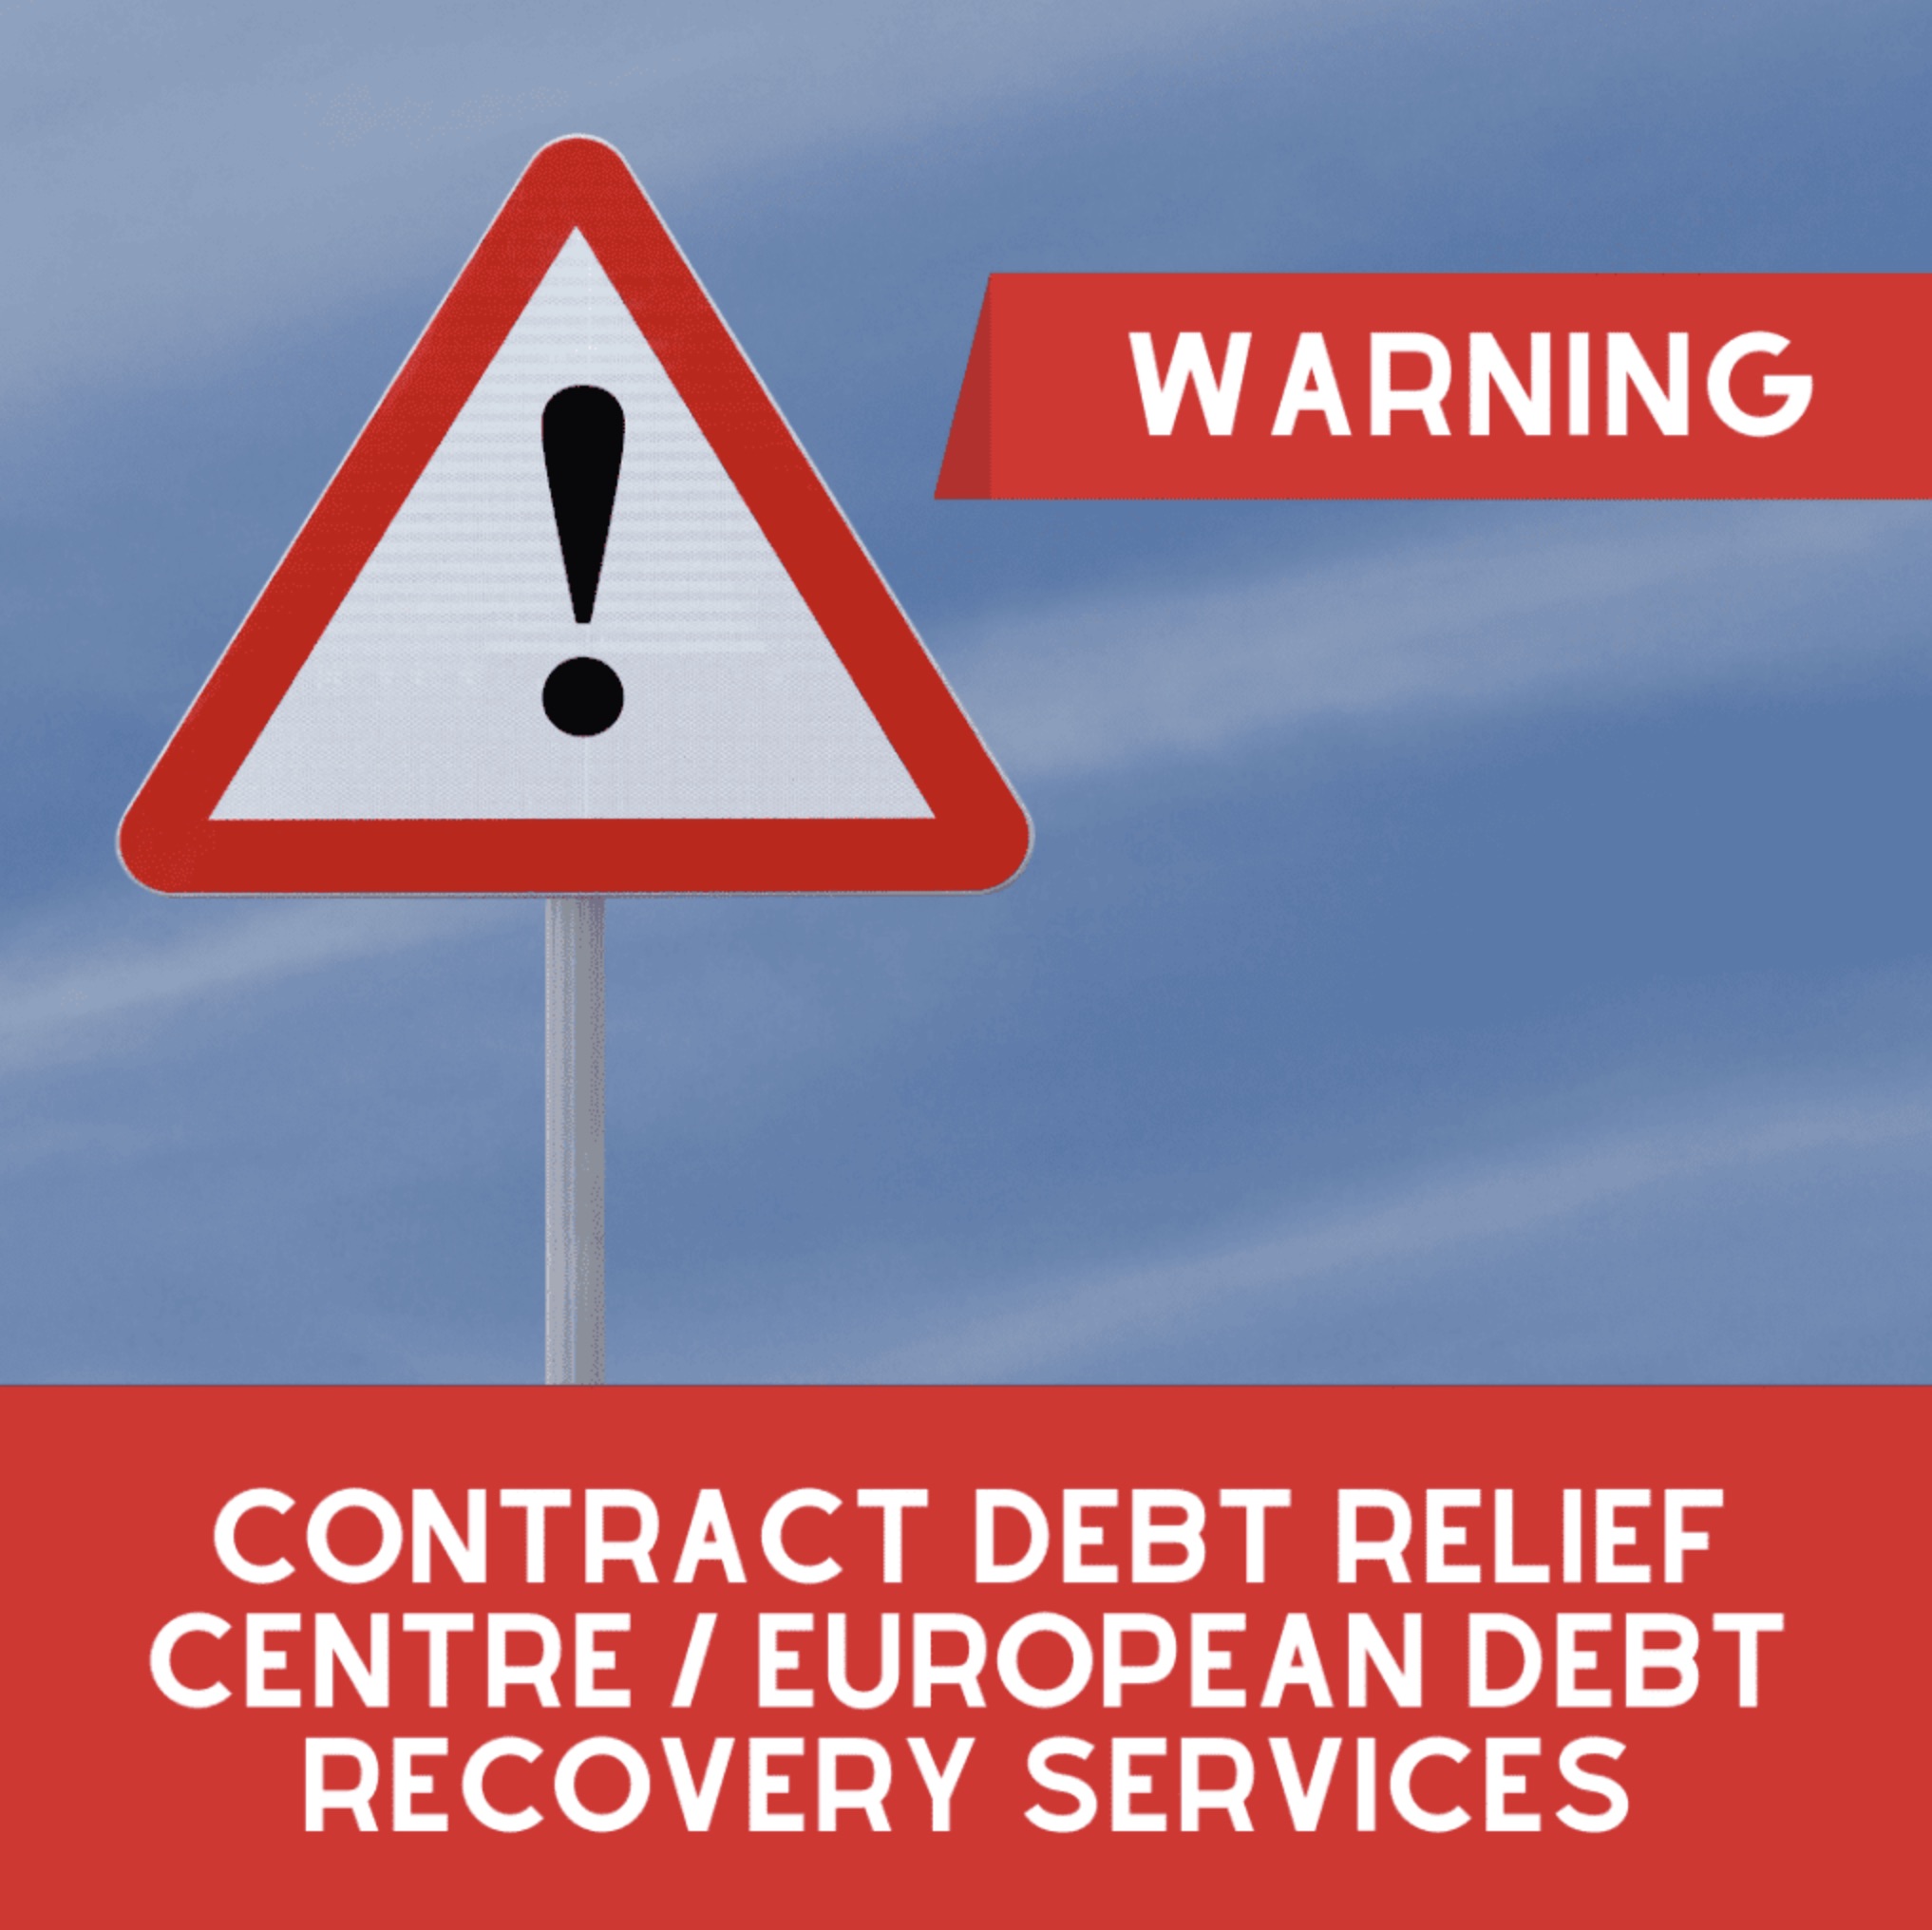 F.A.O. Las Calas Owners – Warning – Contract Debt Relief Centre / European Debt Recovery Services